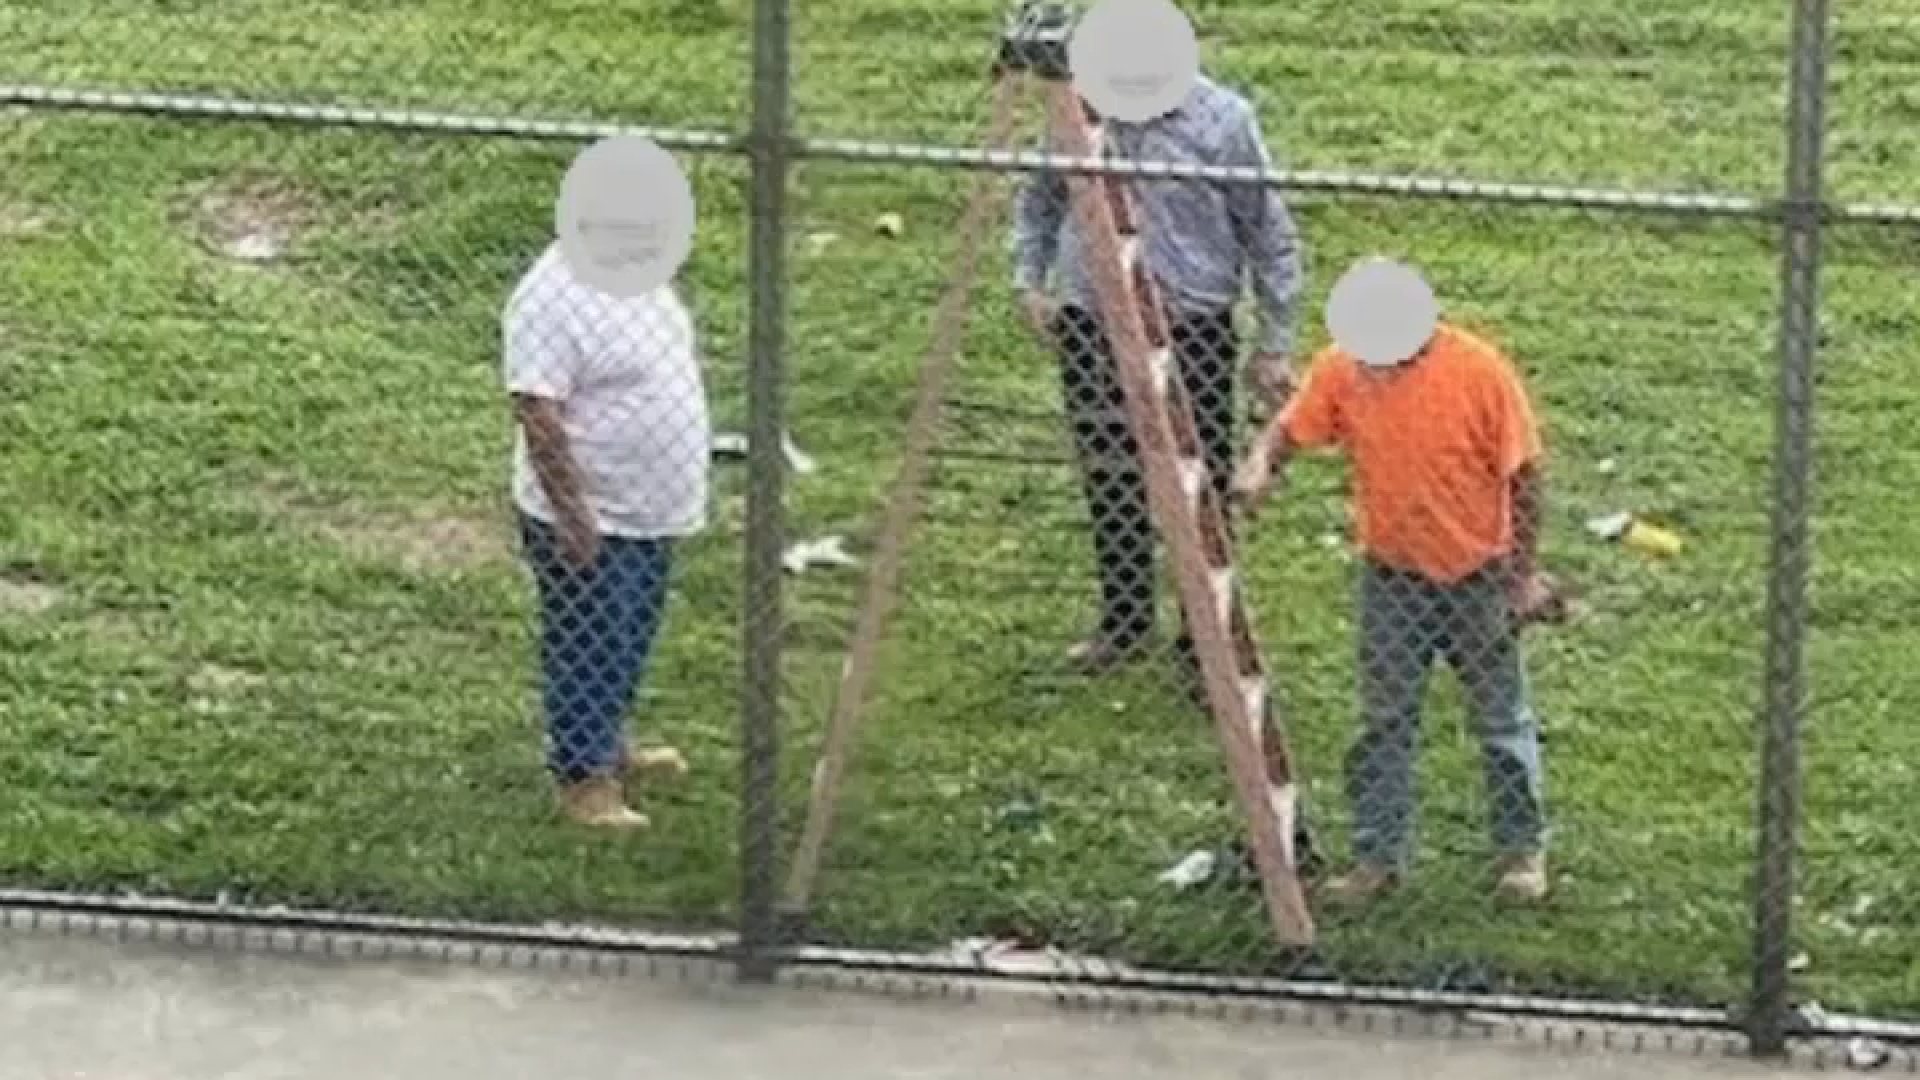 Video shows 2 inmates escaping Philly prison – NBC10 Philadelphia